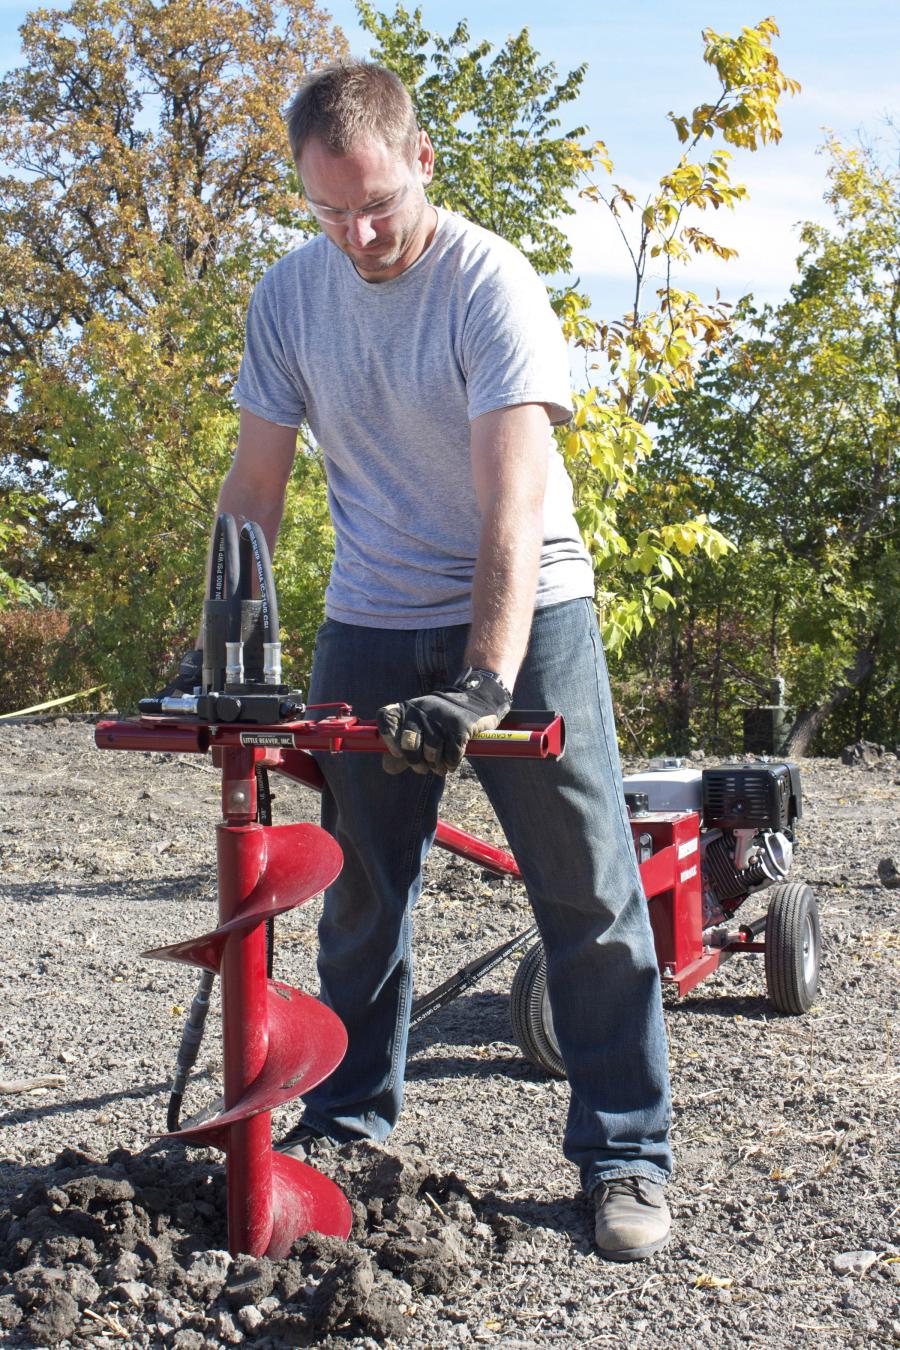 Hydraulic and mechanical earth drills look similar, but excel in different landscaping applications. Hydraulic drills are best suited for installing signs and planting trees, and mechanical drills are ideal for fitting fence and deck posts and planting sm